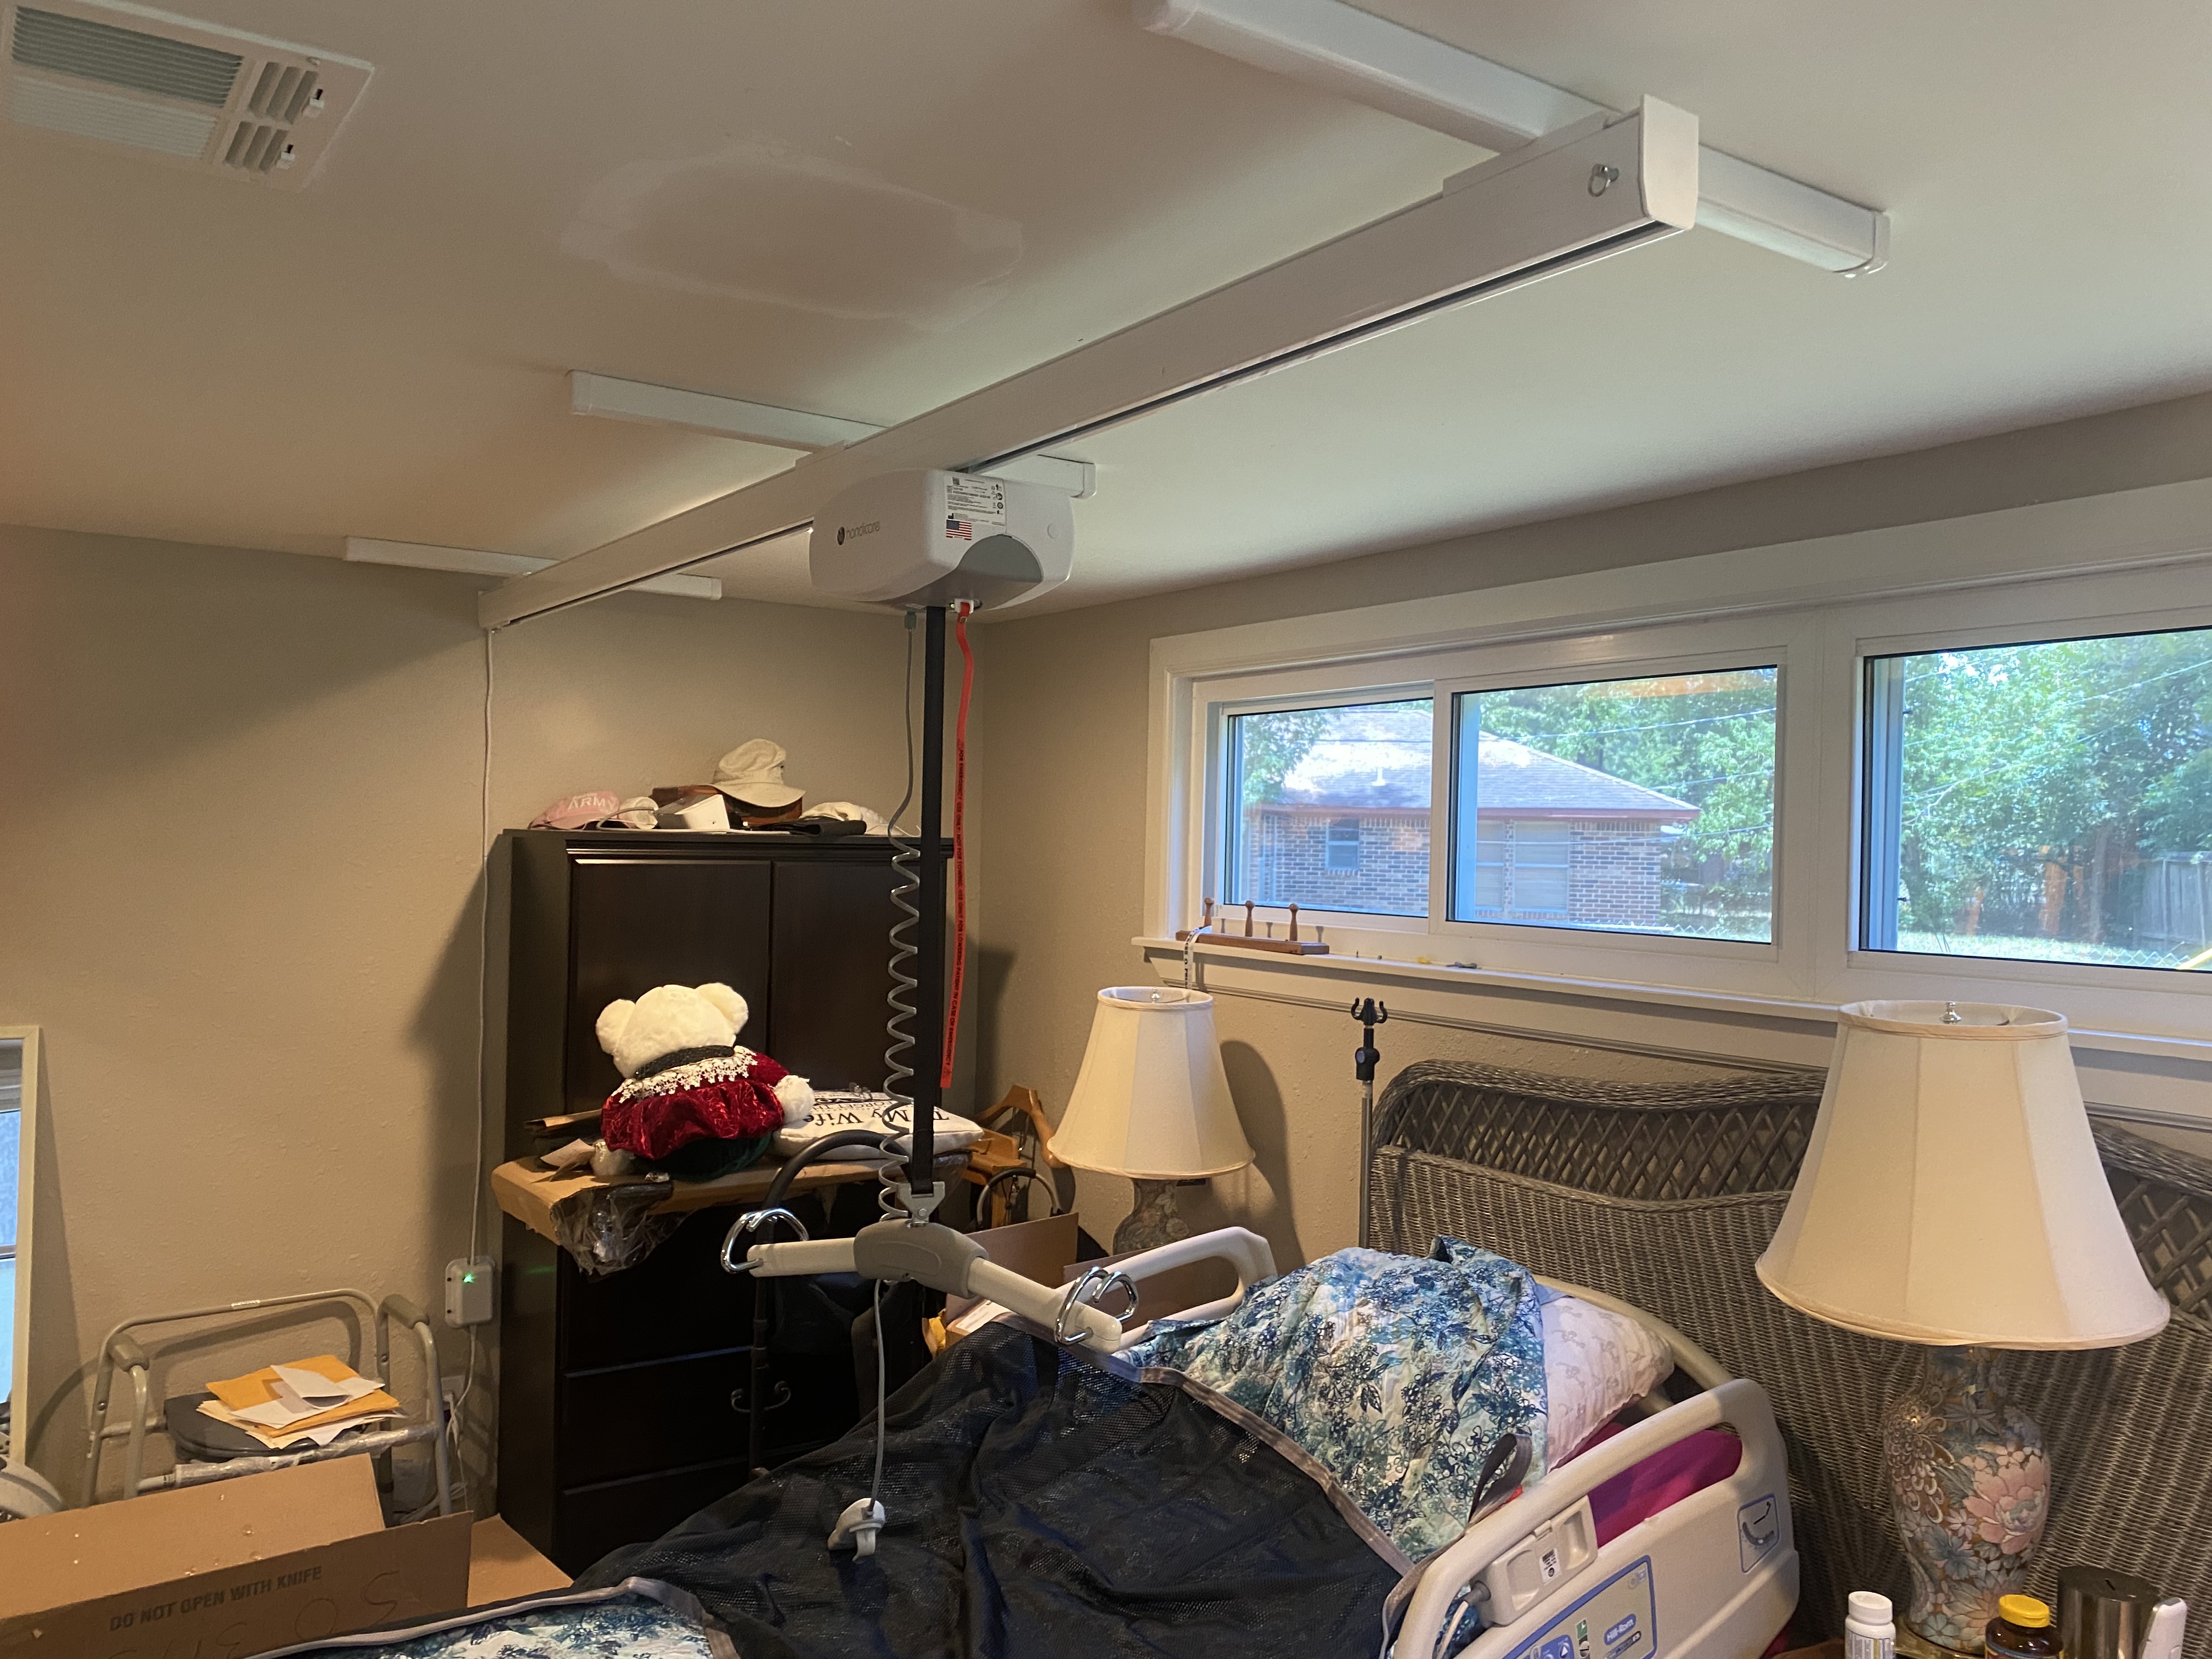 LiveWell's Latest Installation of a Ceiling Lift